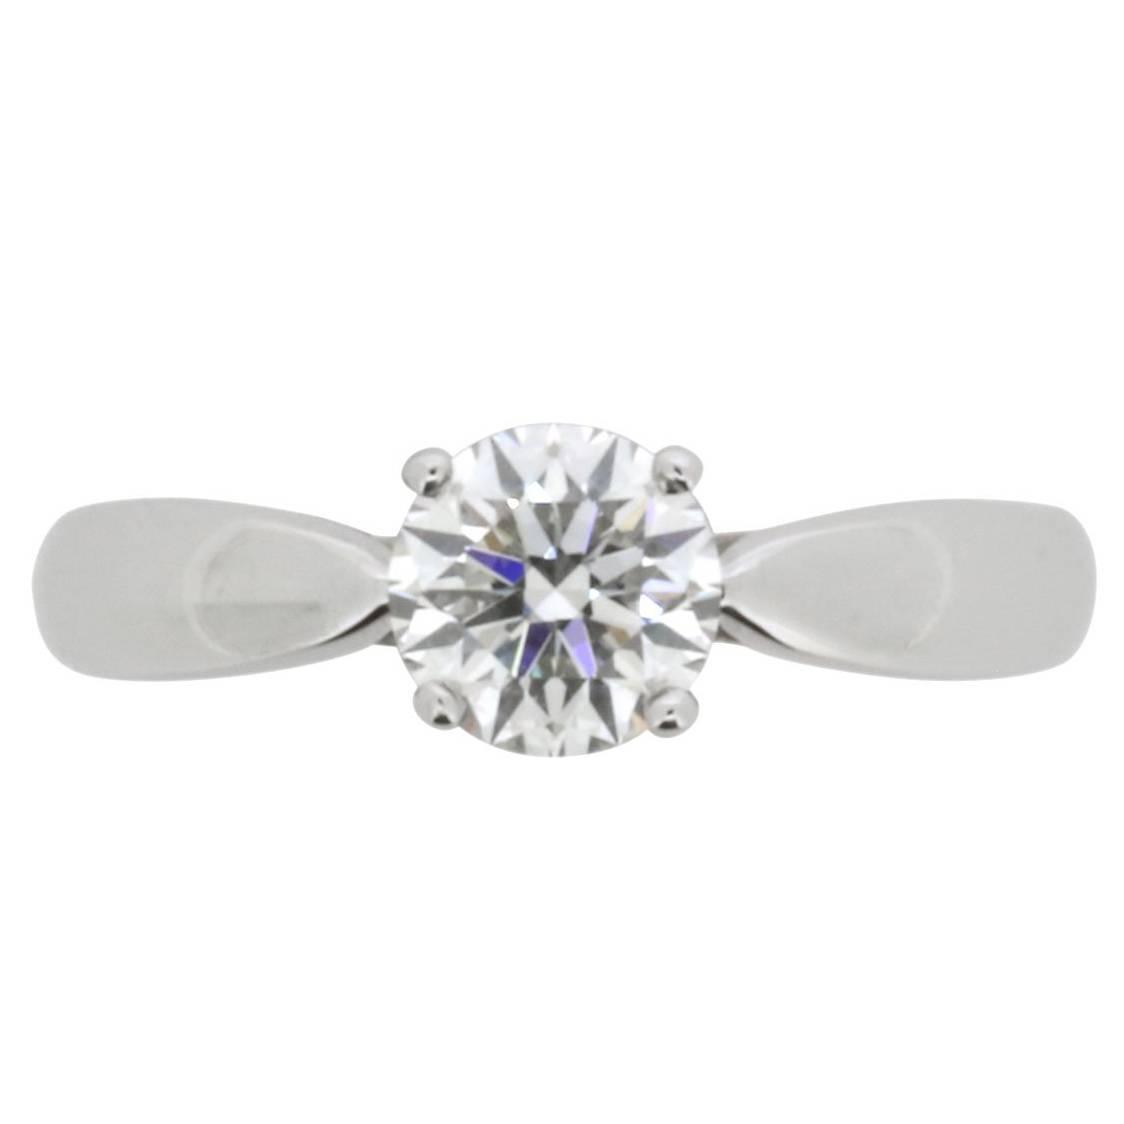 Tiffany Jewel Tiffany And Co Etoile Diamond Solitaire Ring For Sale At Stdibs Jpg